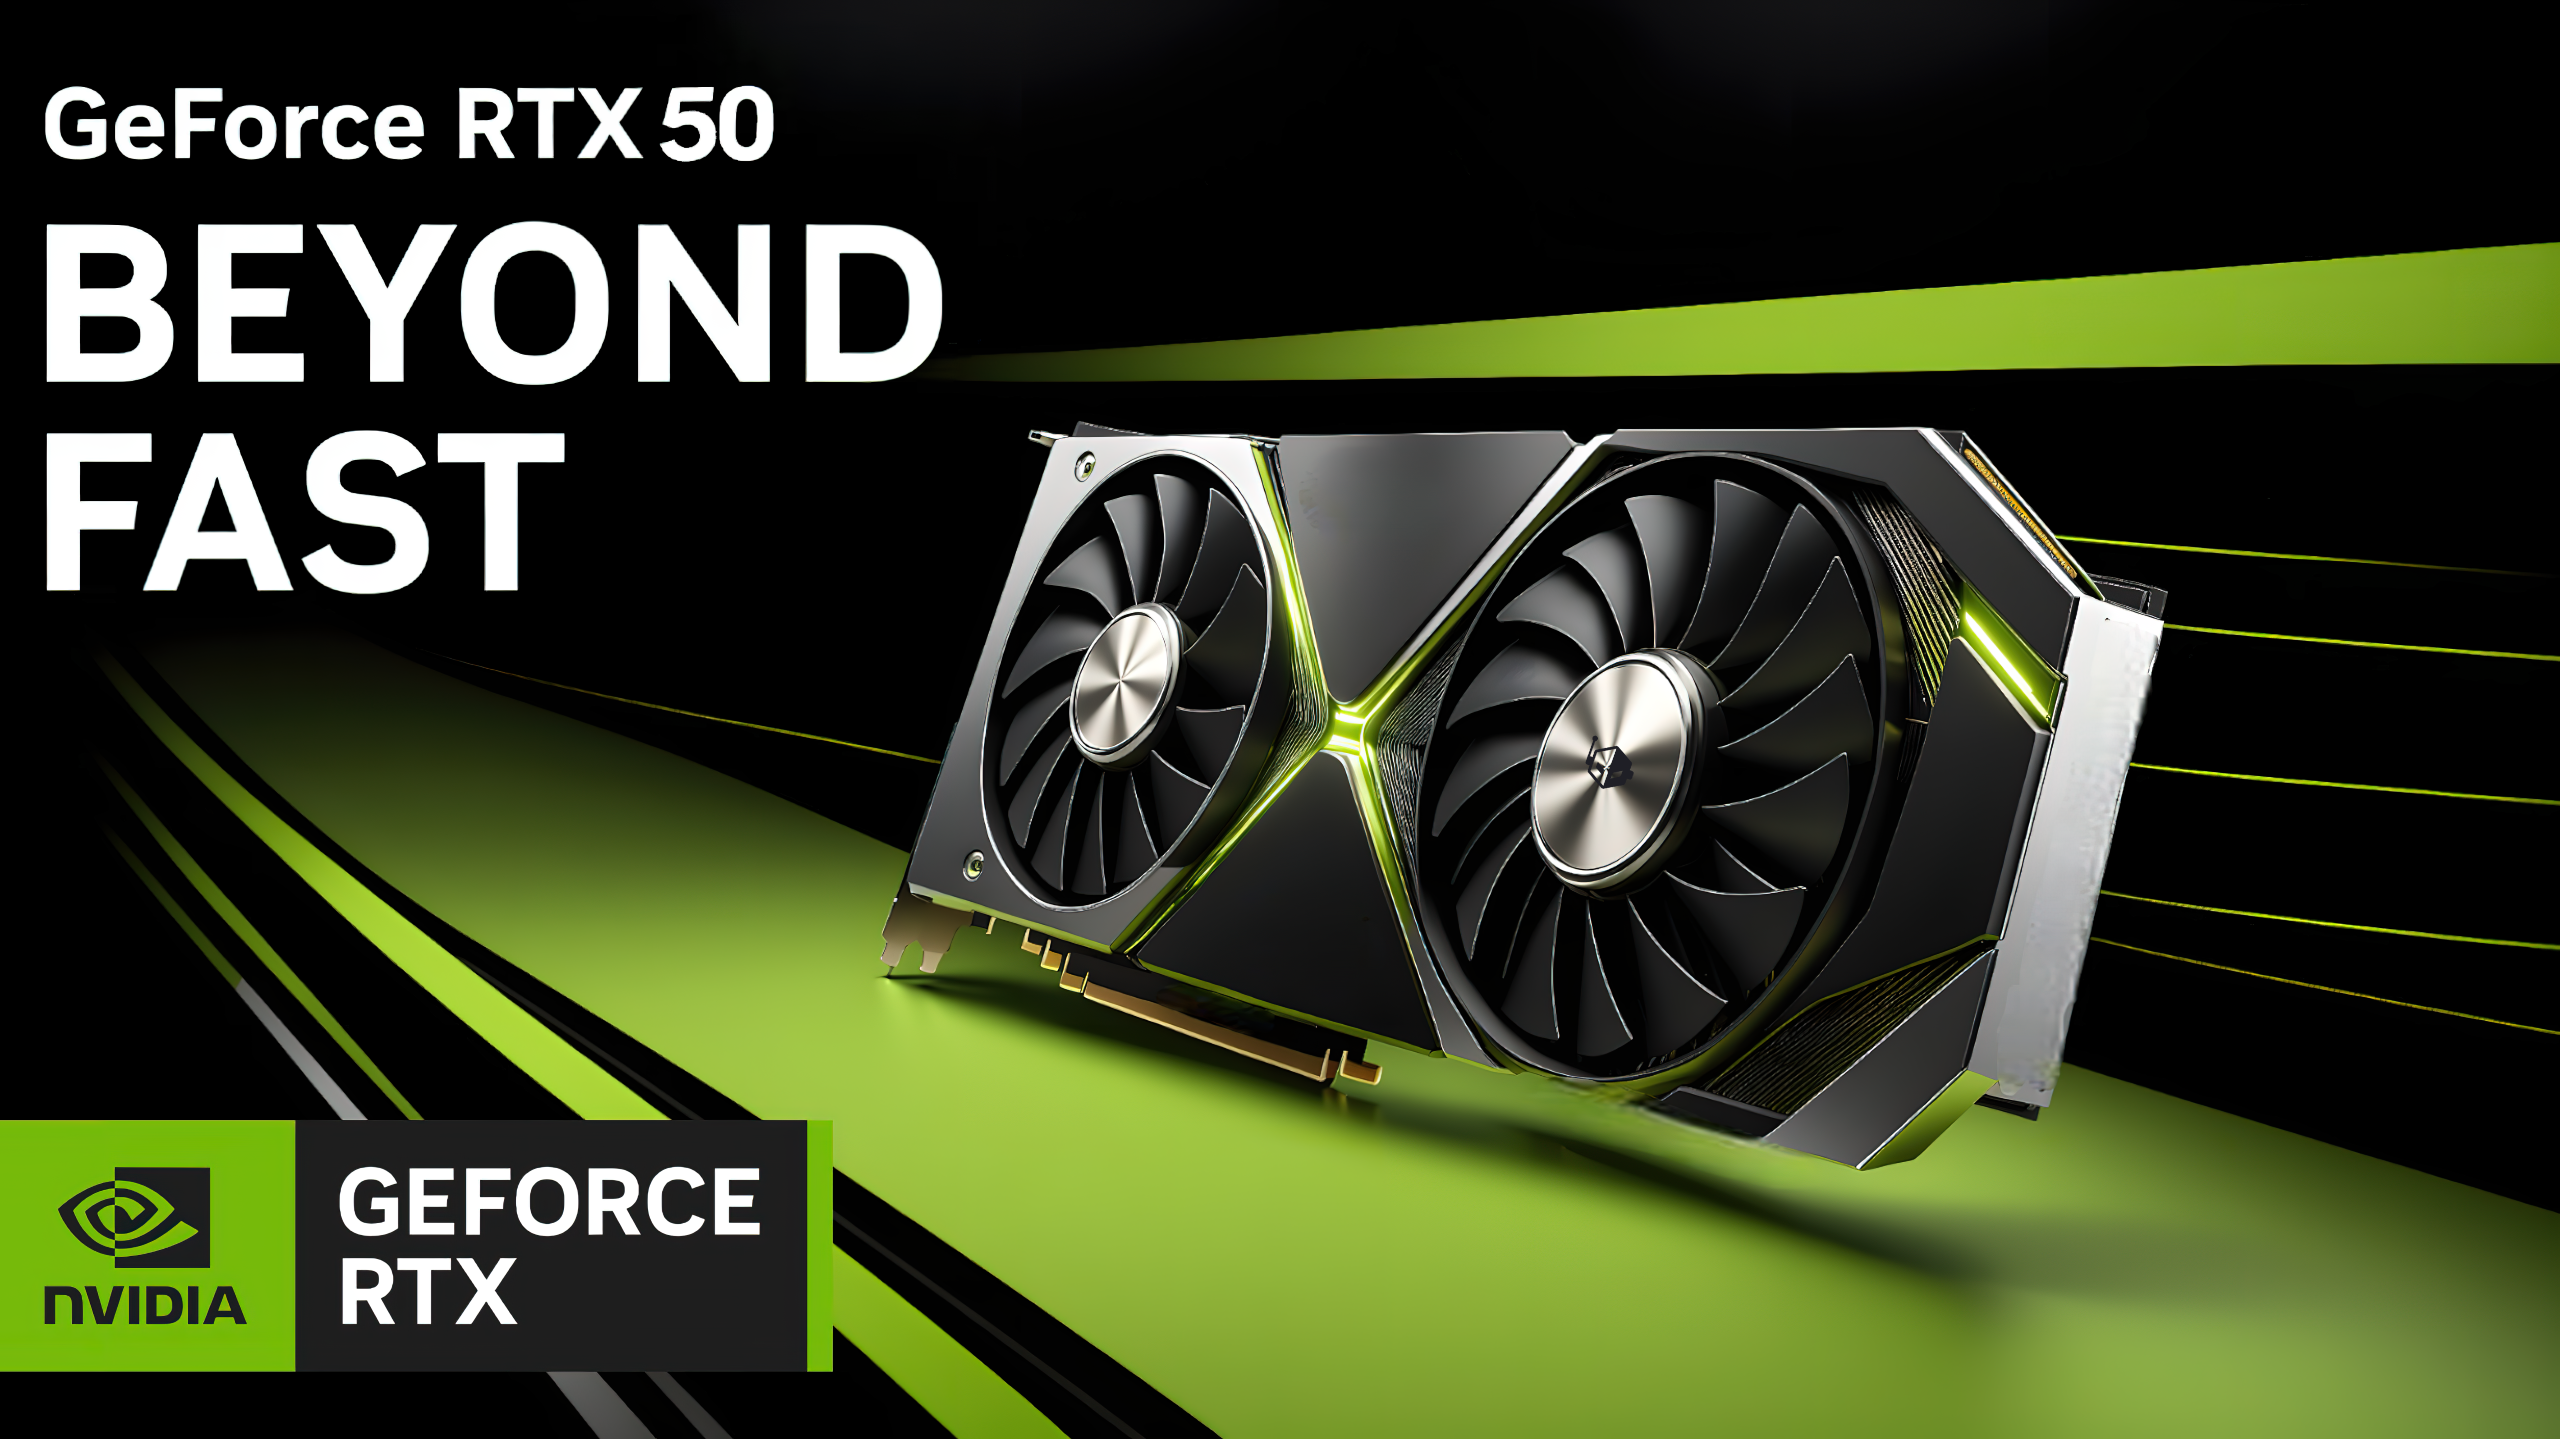 NVIDIA GeForce RTX 50 Series comes with GDDR7 memory, 384-bit bus, and double the performance of “Ada Lovelace” – Nvidia